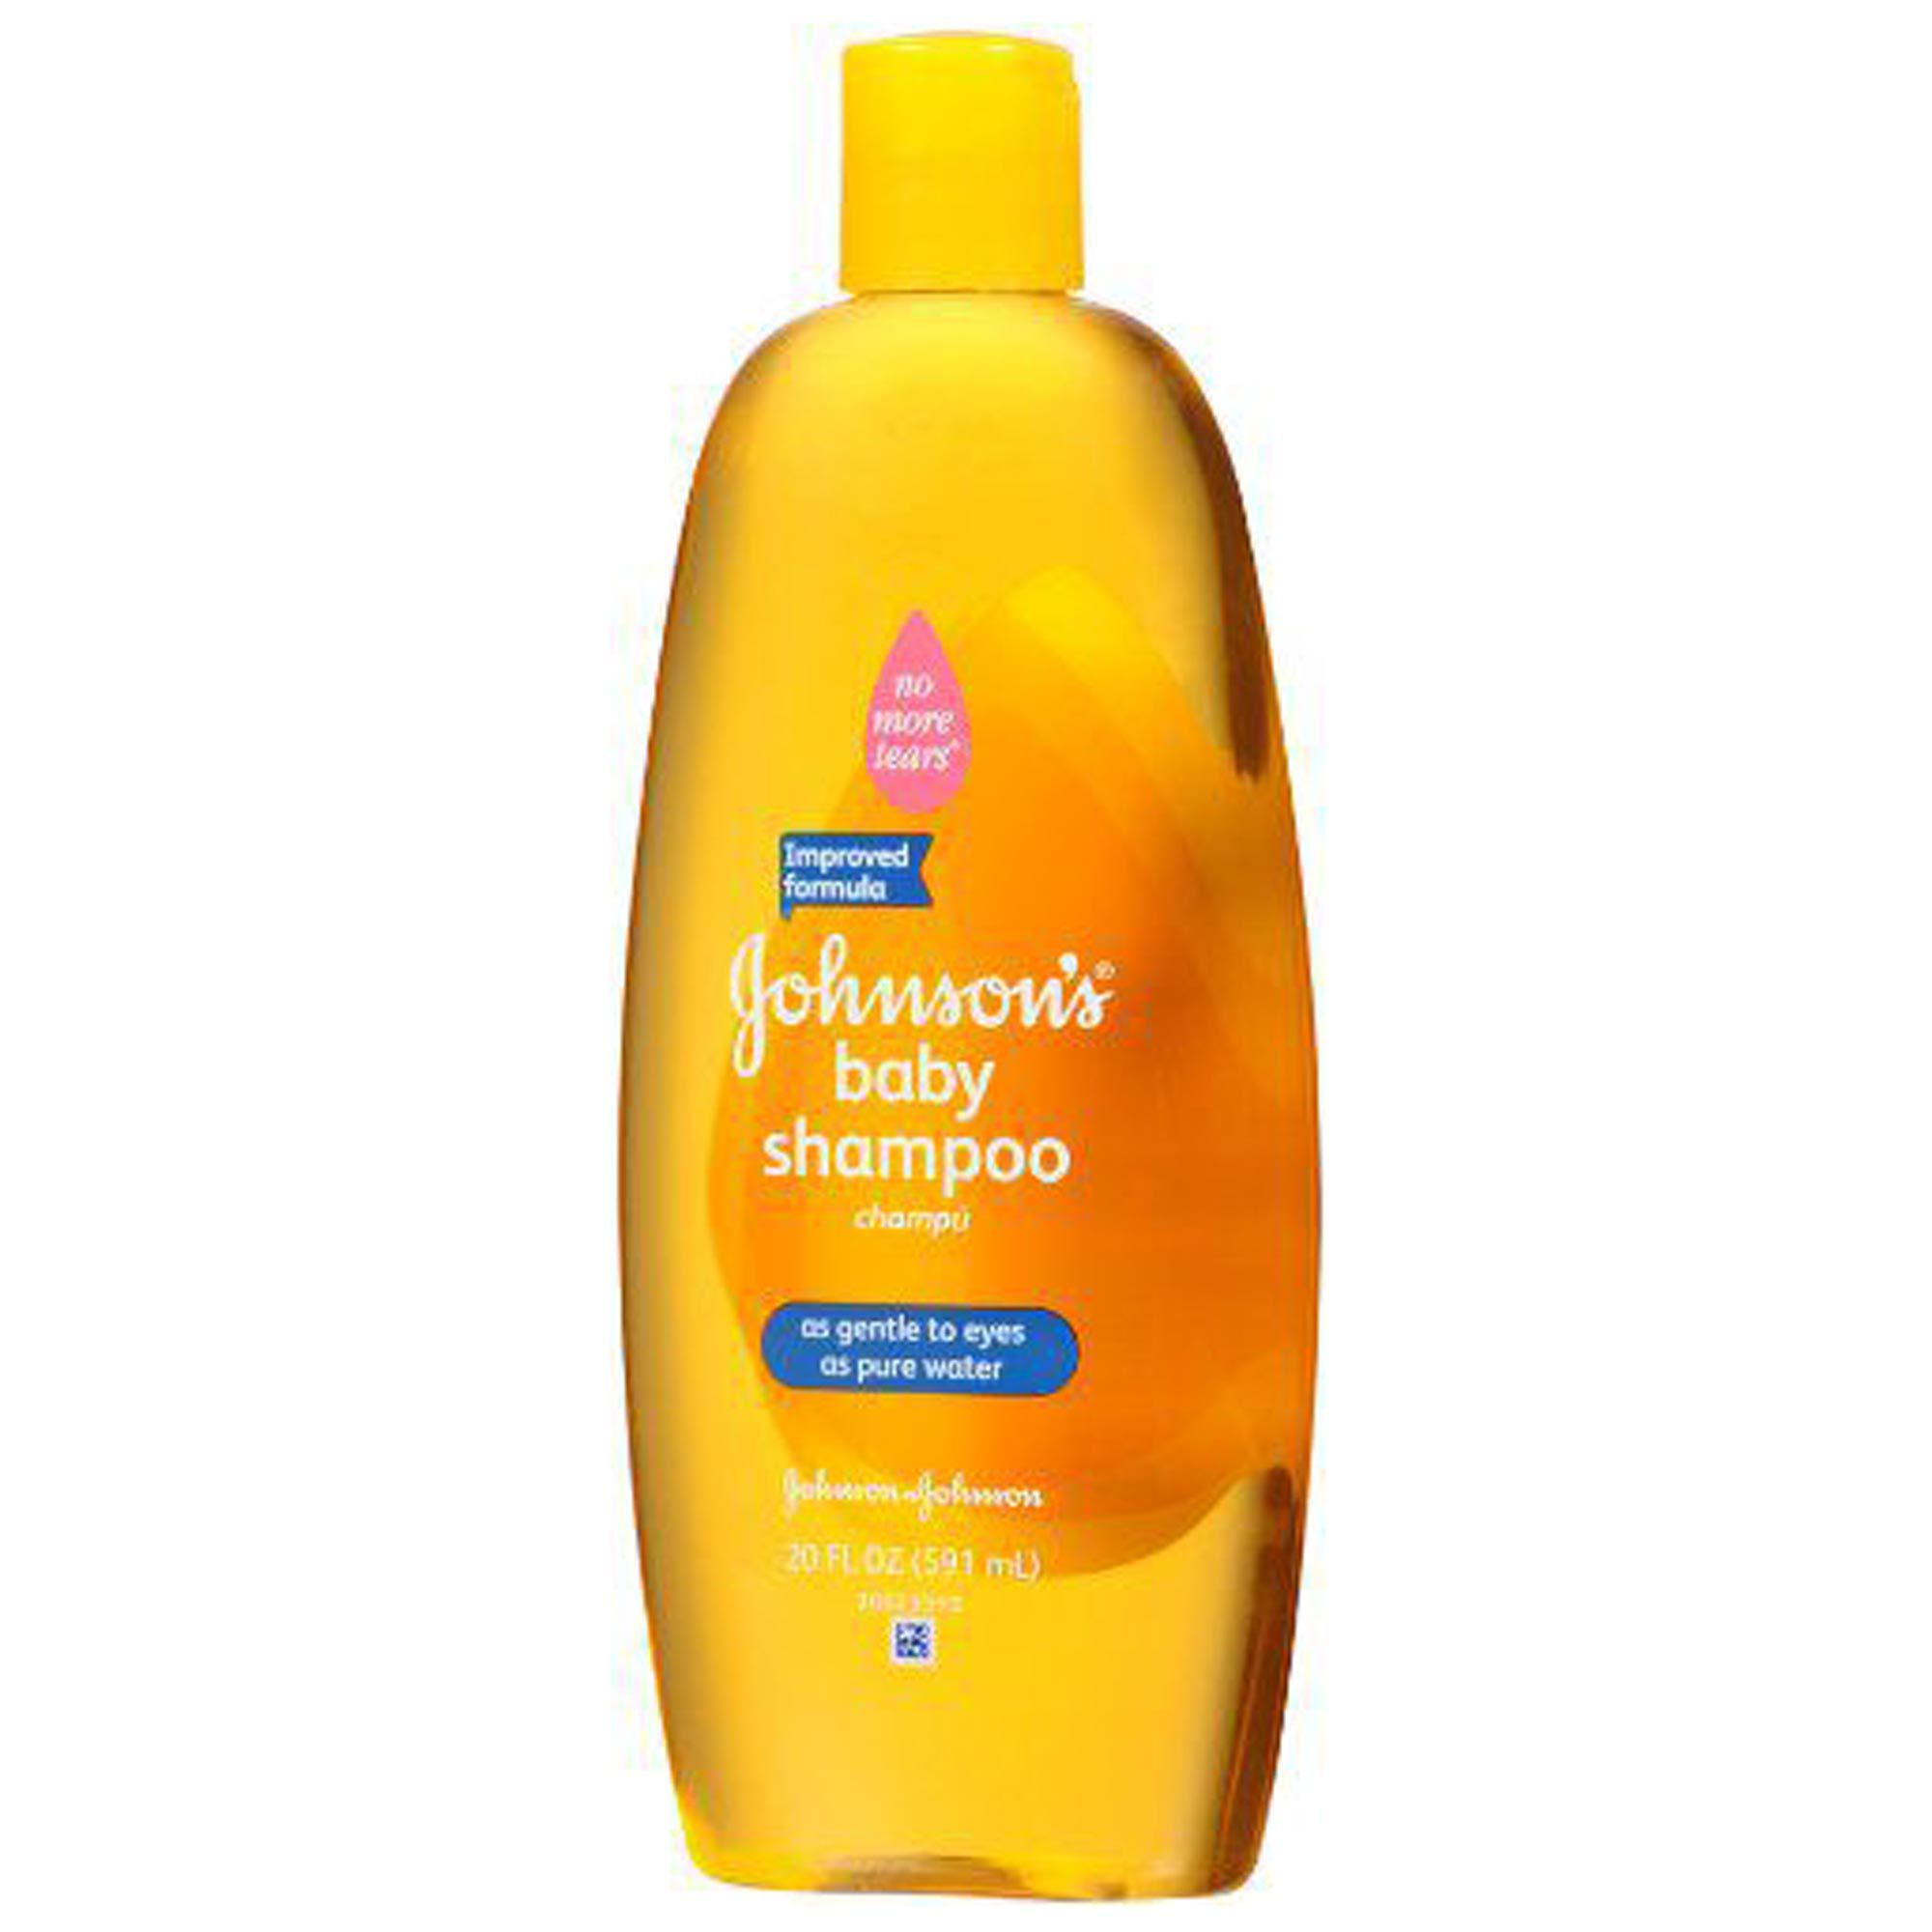 baby shampoo for makeup brushes